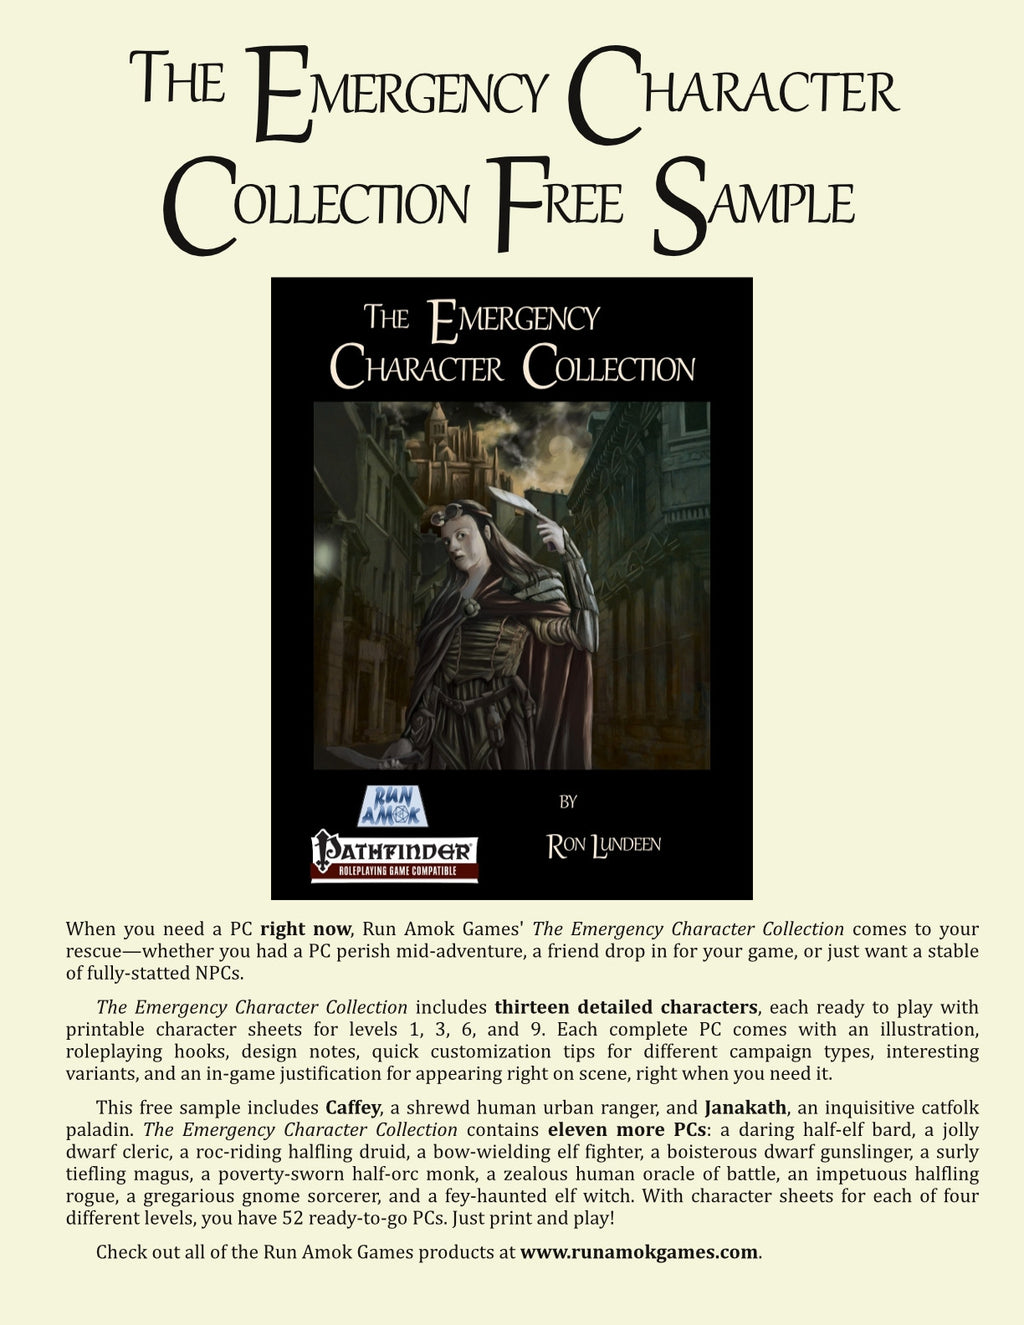 The Emergency Character Collection Free Sample